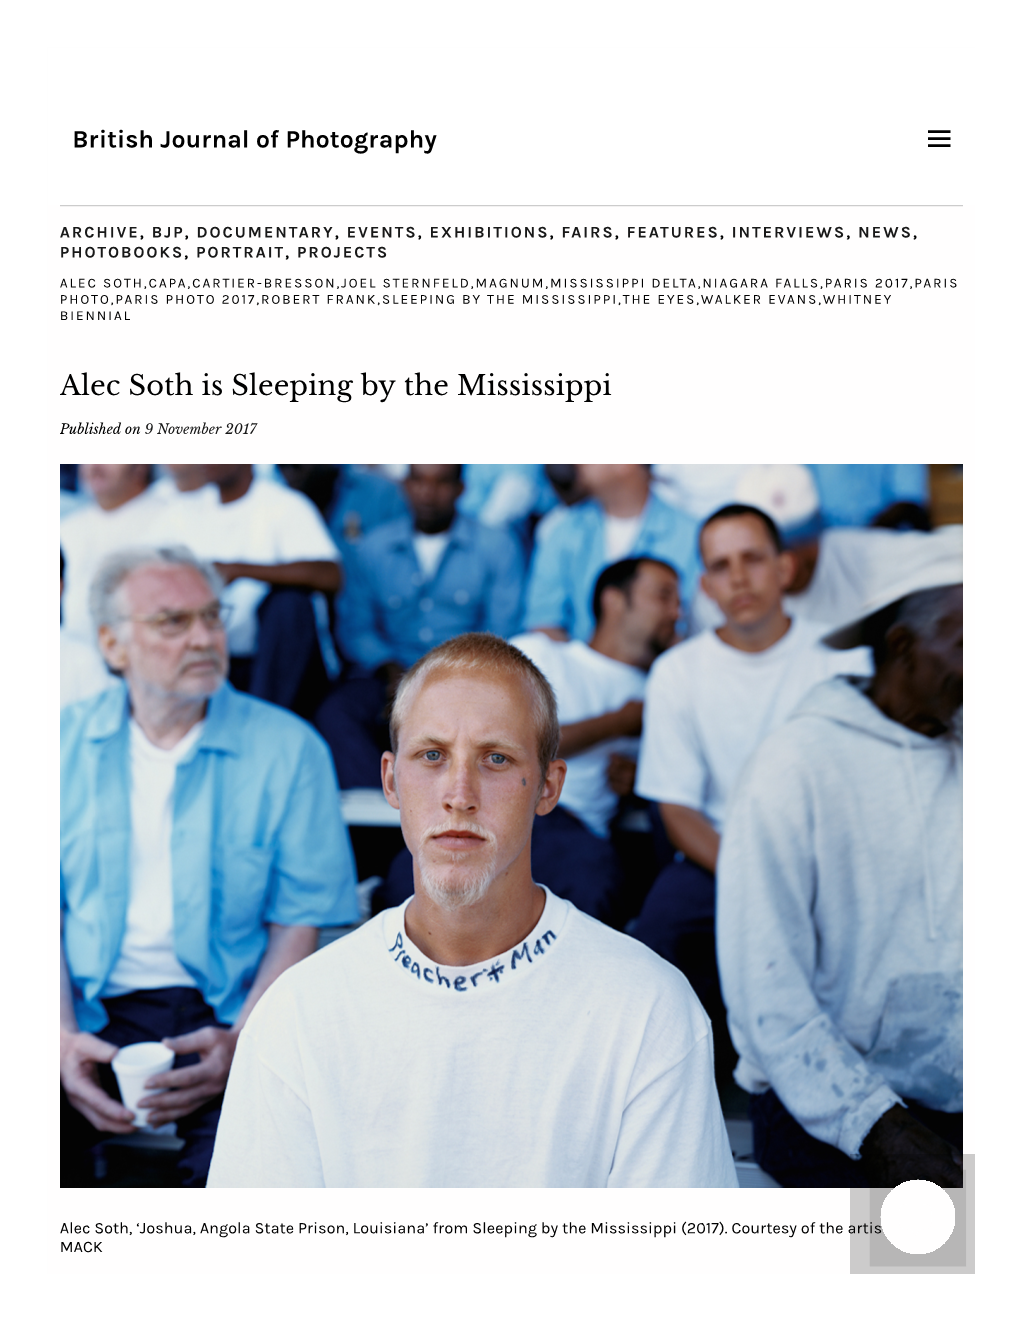 Alec Soth Is Sleeping by the Mississippi